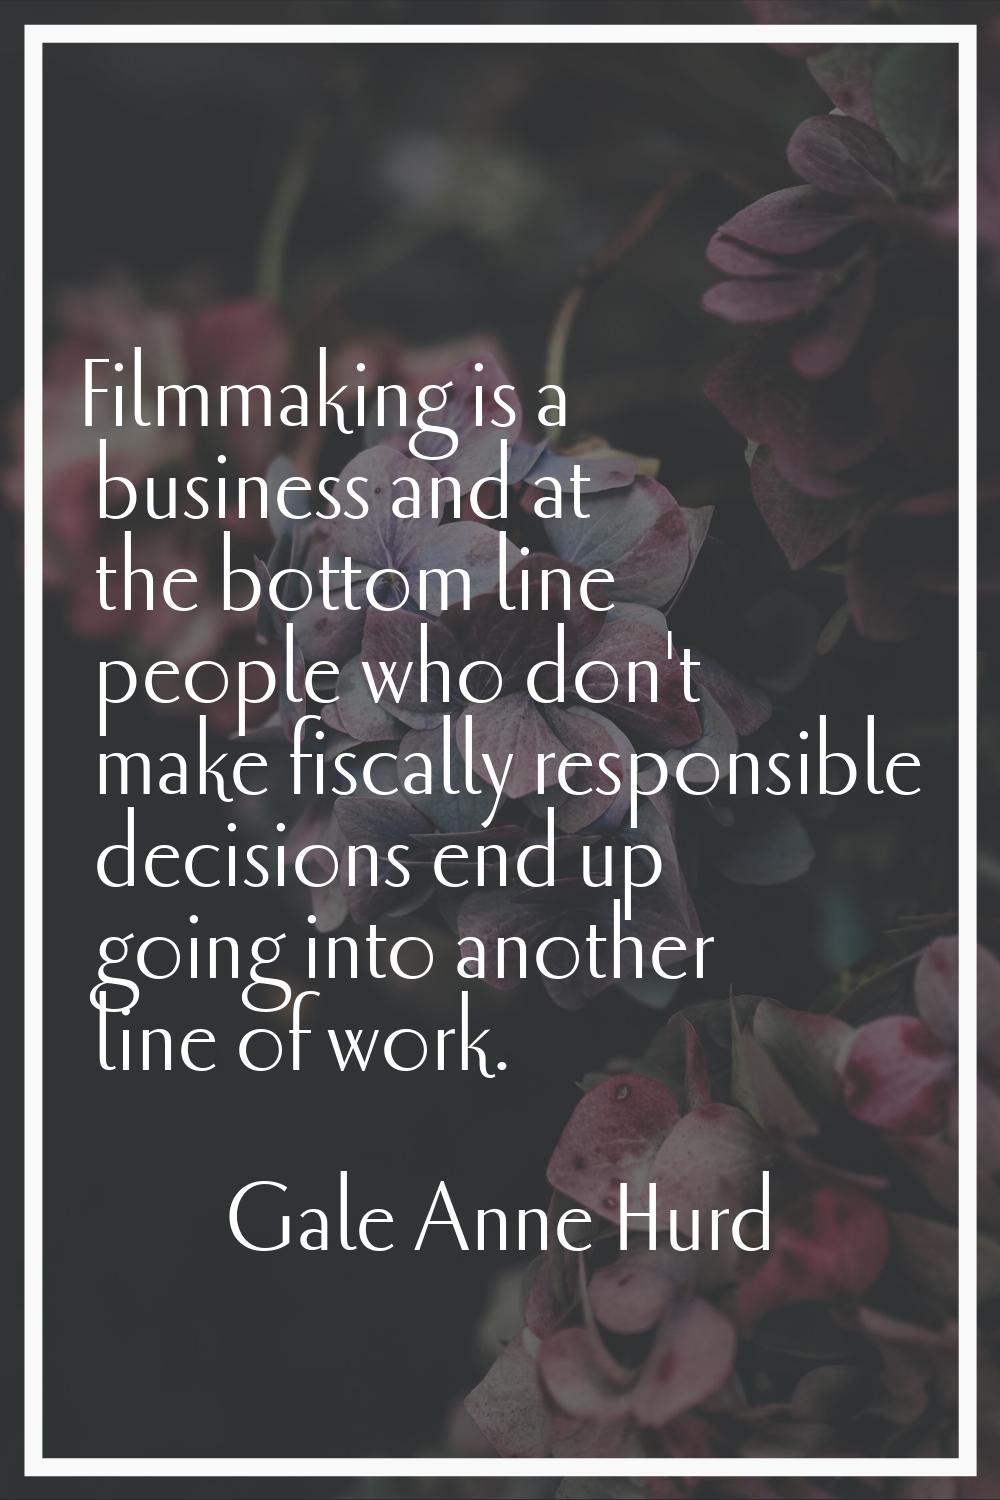 Filmmaking is a business and at the bottom line people who don't make fiscally responsible decision